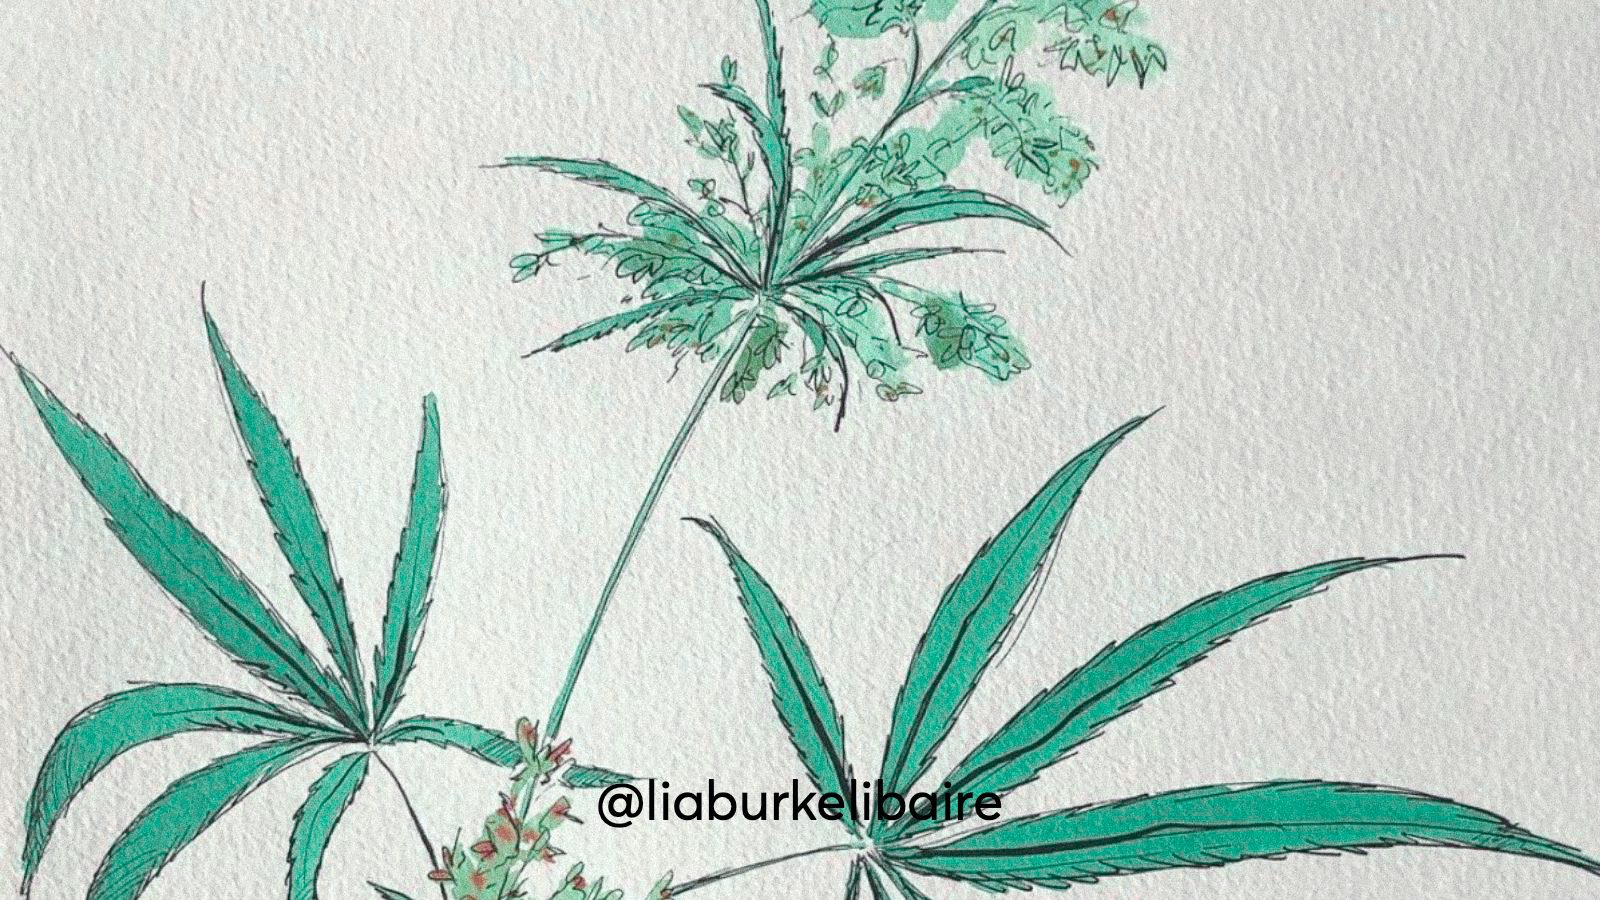 An illustration of a cannabis leaf, flower, and stem.